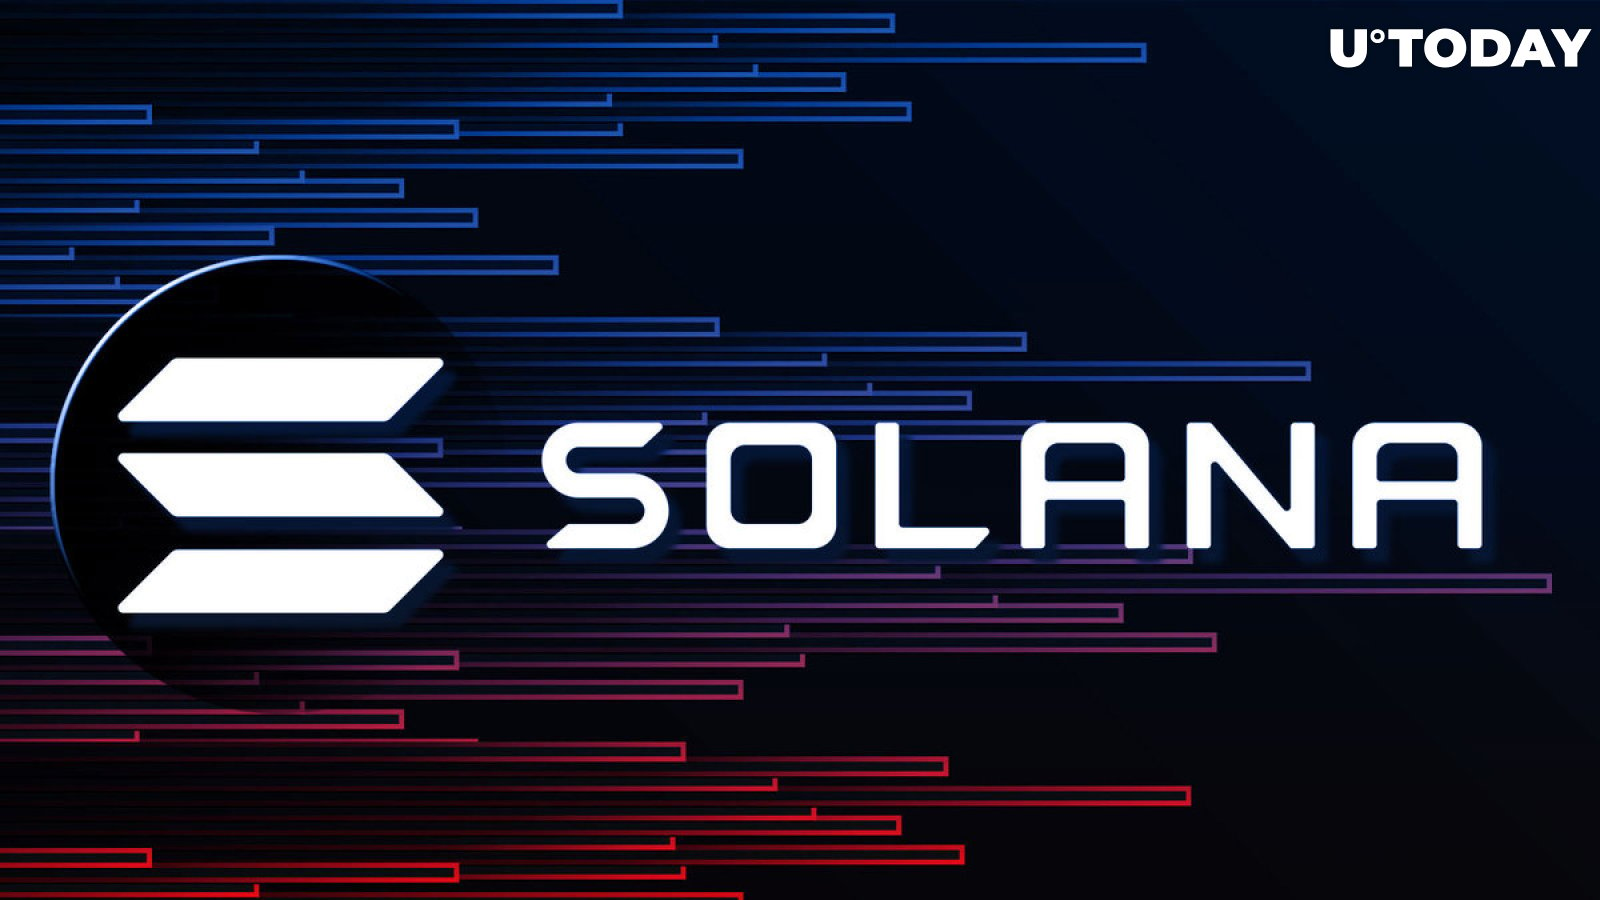 Solana (SOL) Doesn't Have Any Long-Term Value, Cyber Capital CIO Claims